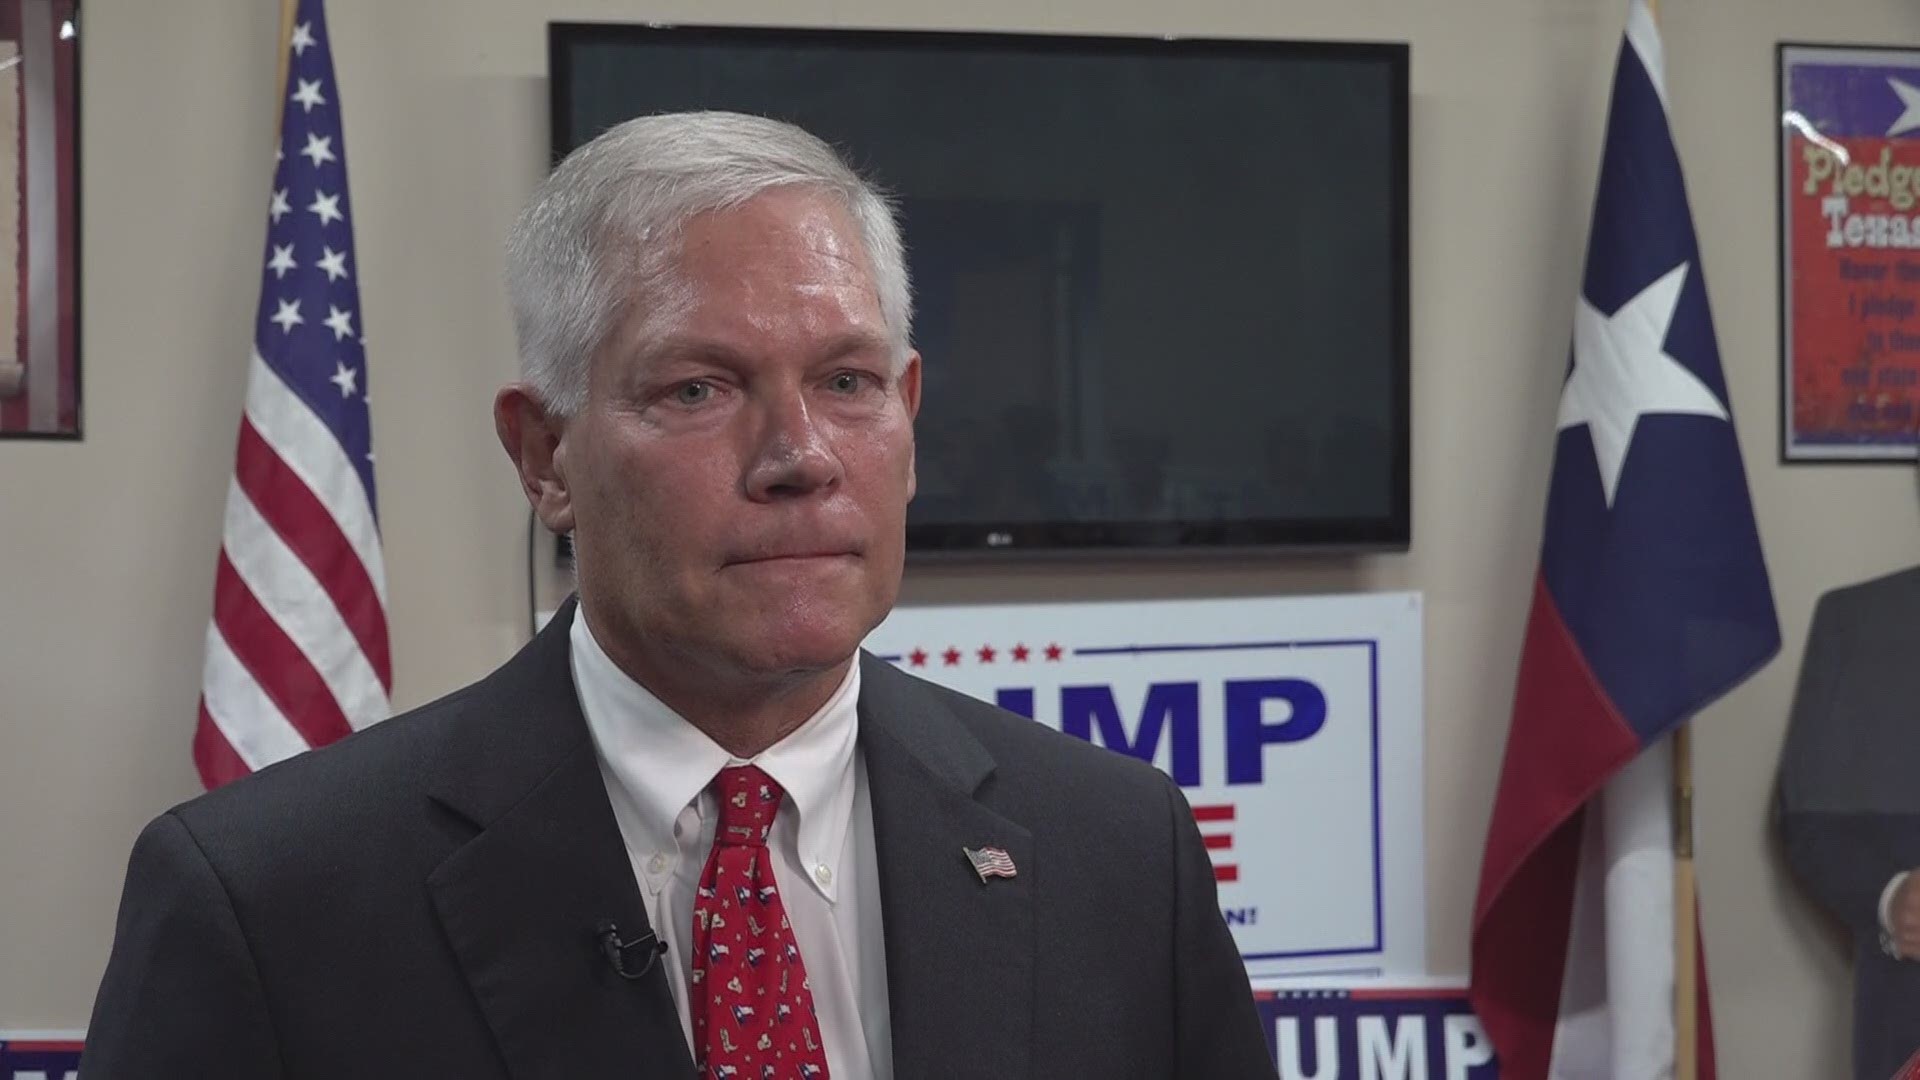 Cole Johnson interviews Pete Sessions, who announced he is running for congress.